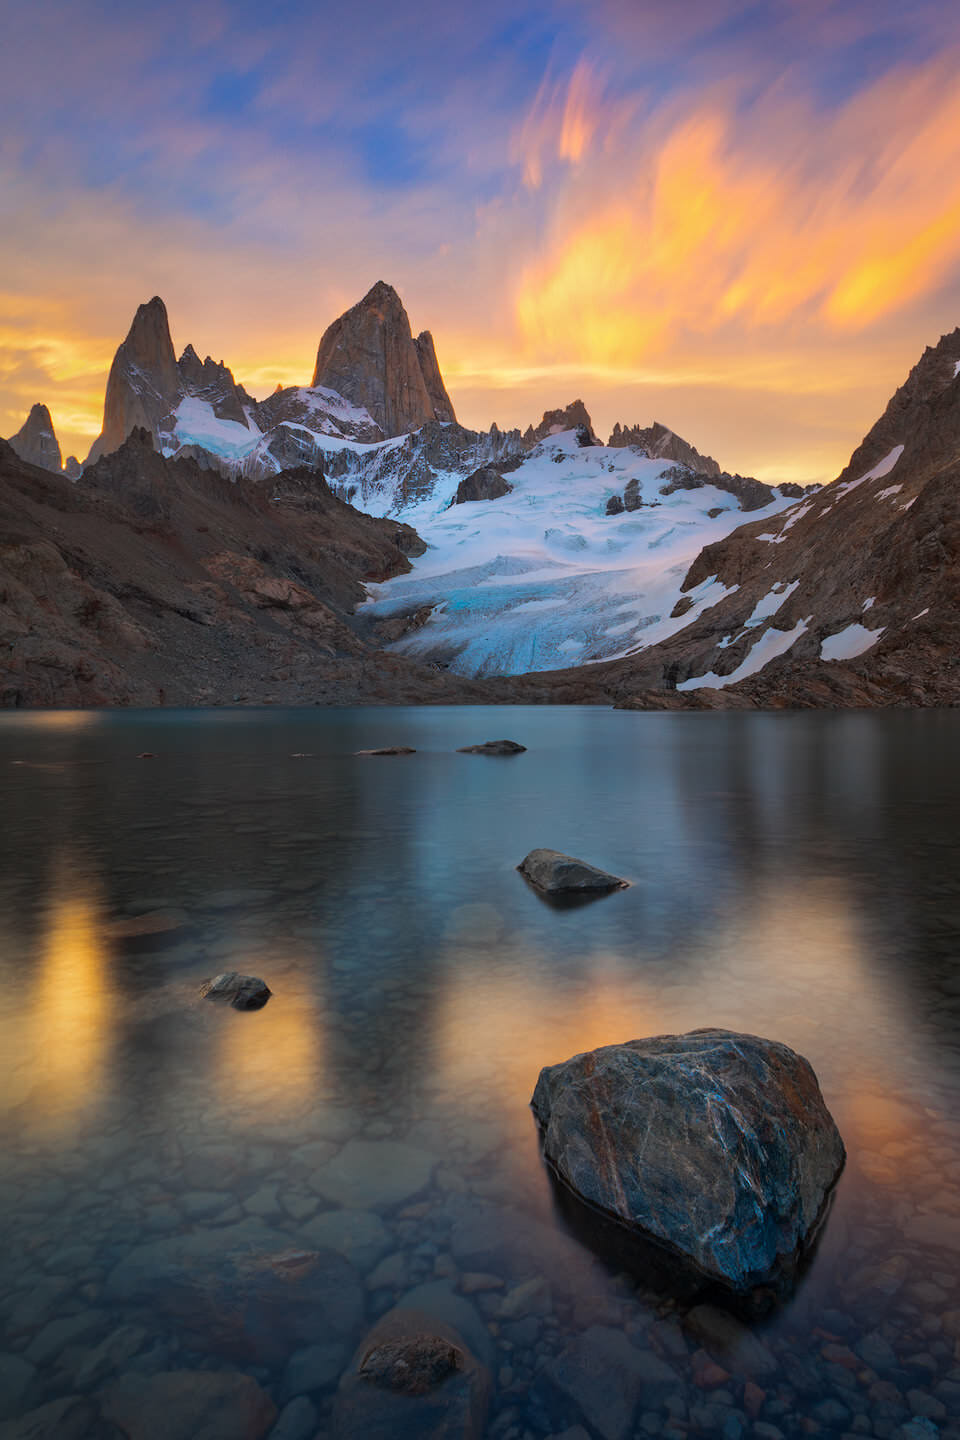 Sunset clouds above Fitz Roy and Laguna de los Tres